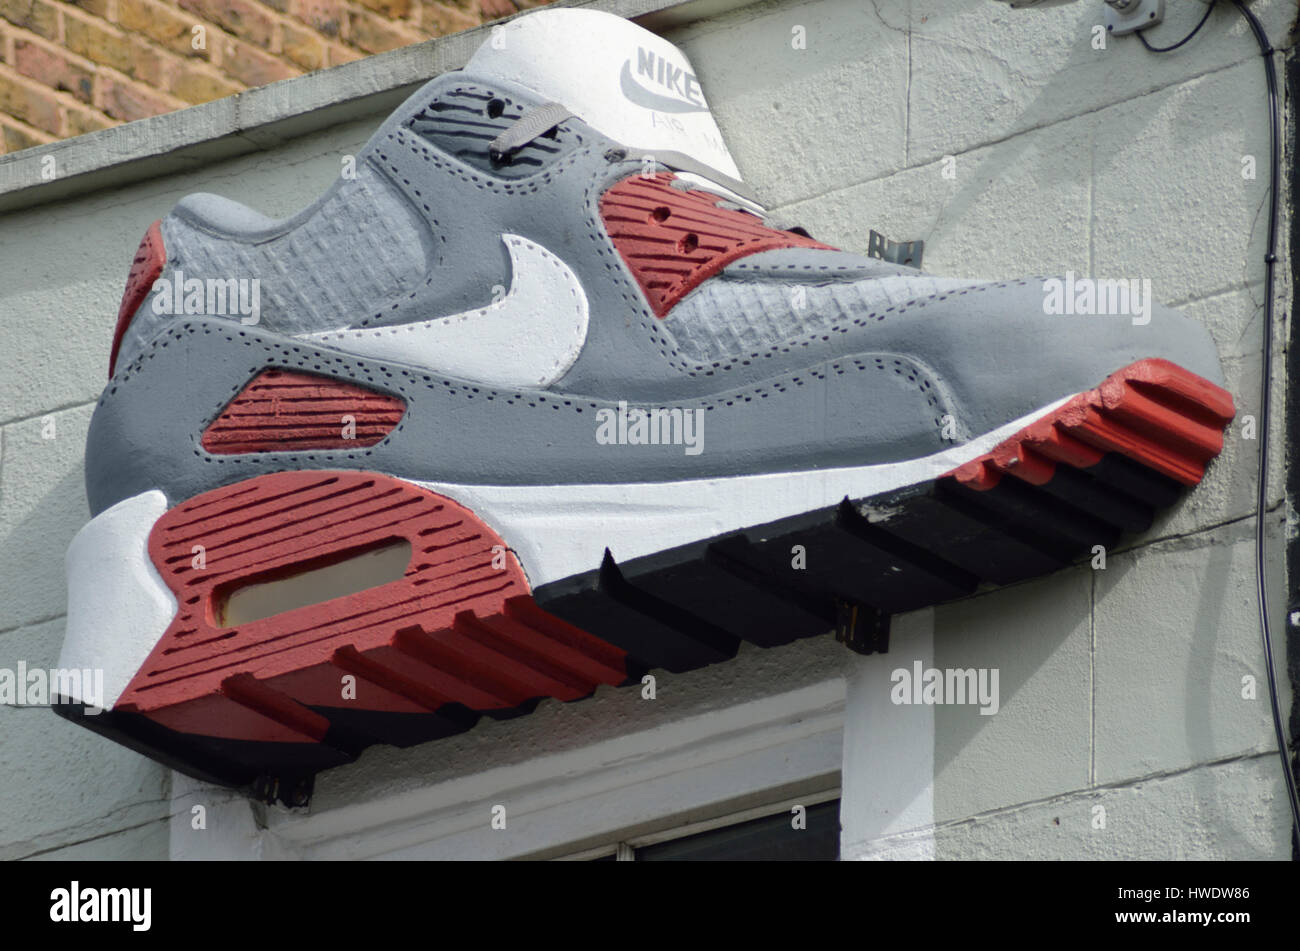 Nike Shoe High Resolution Stock Photography and Images - Alamy